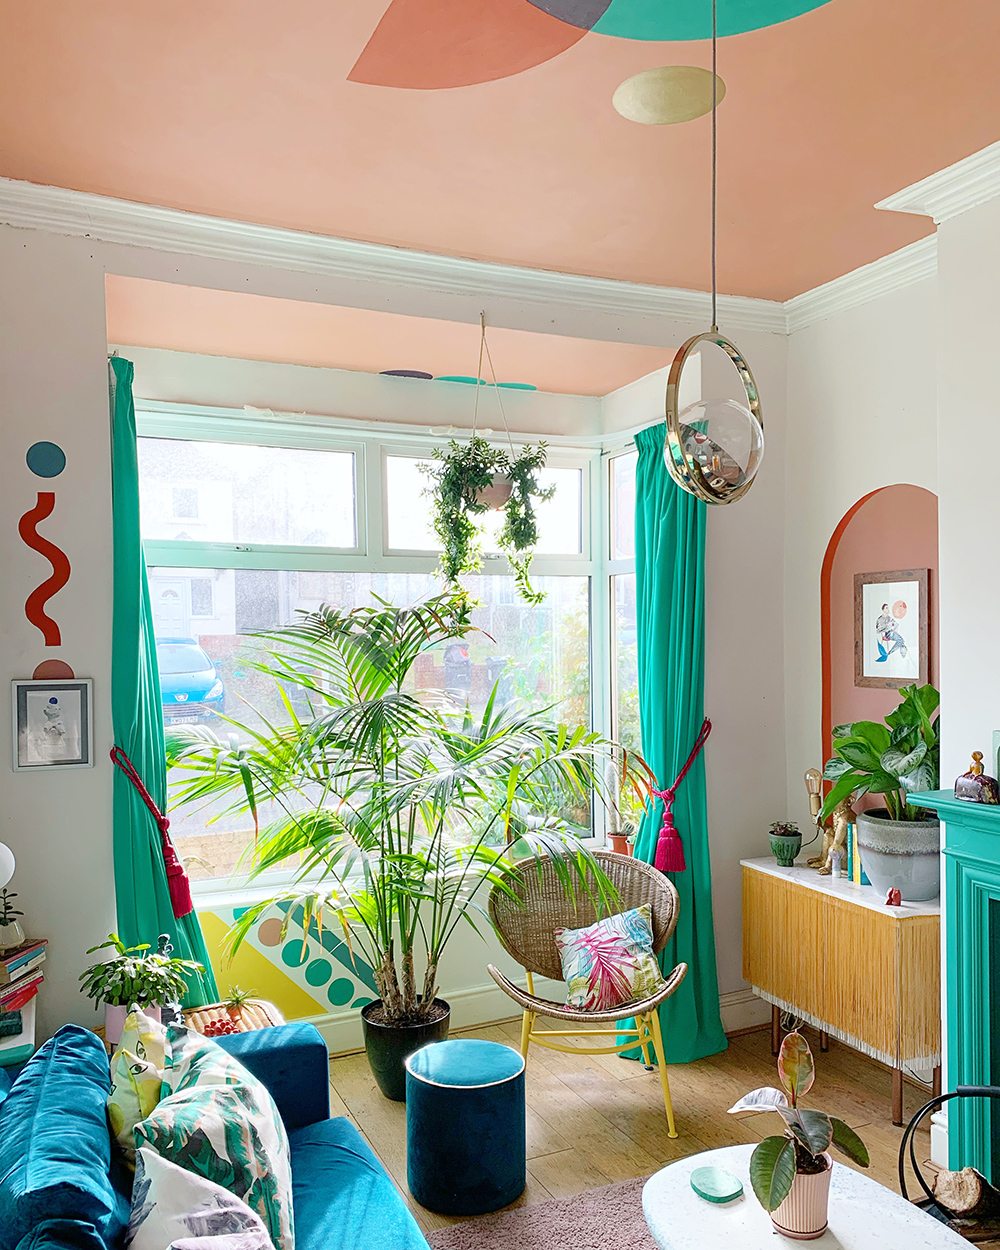 Teal and pink living room with unusual paint effect, ceiling mural and lots of lush house plants